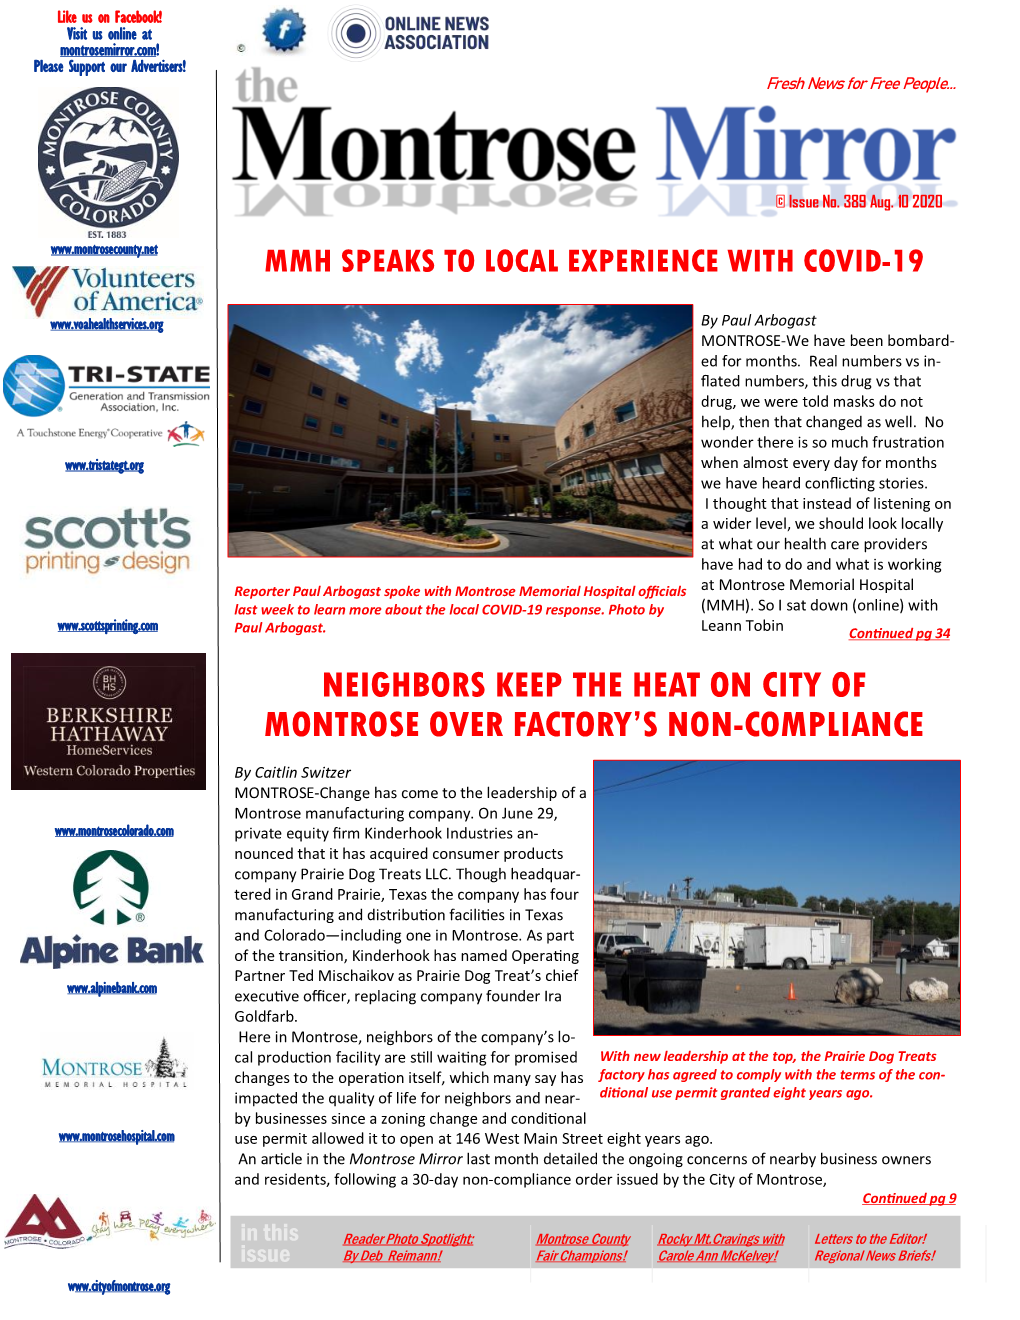 Neighbors Keep the Heat on City of Montrose Over Factory’S Non-Compliance